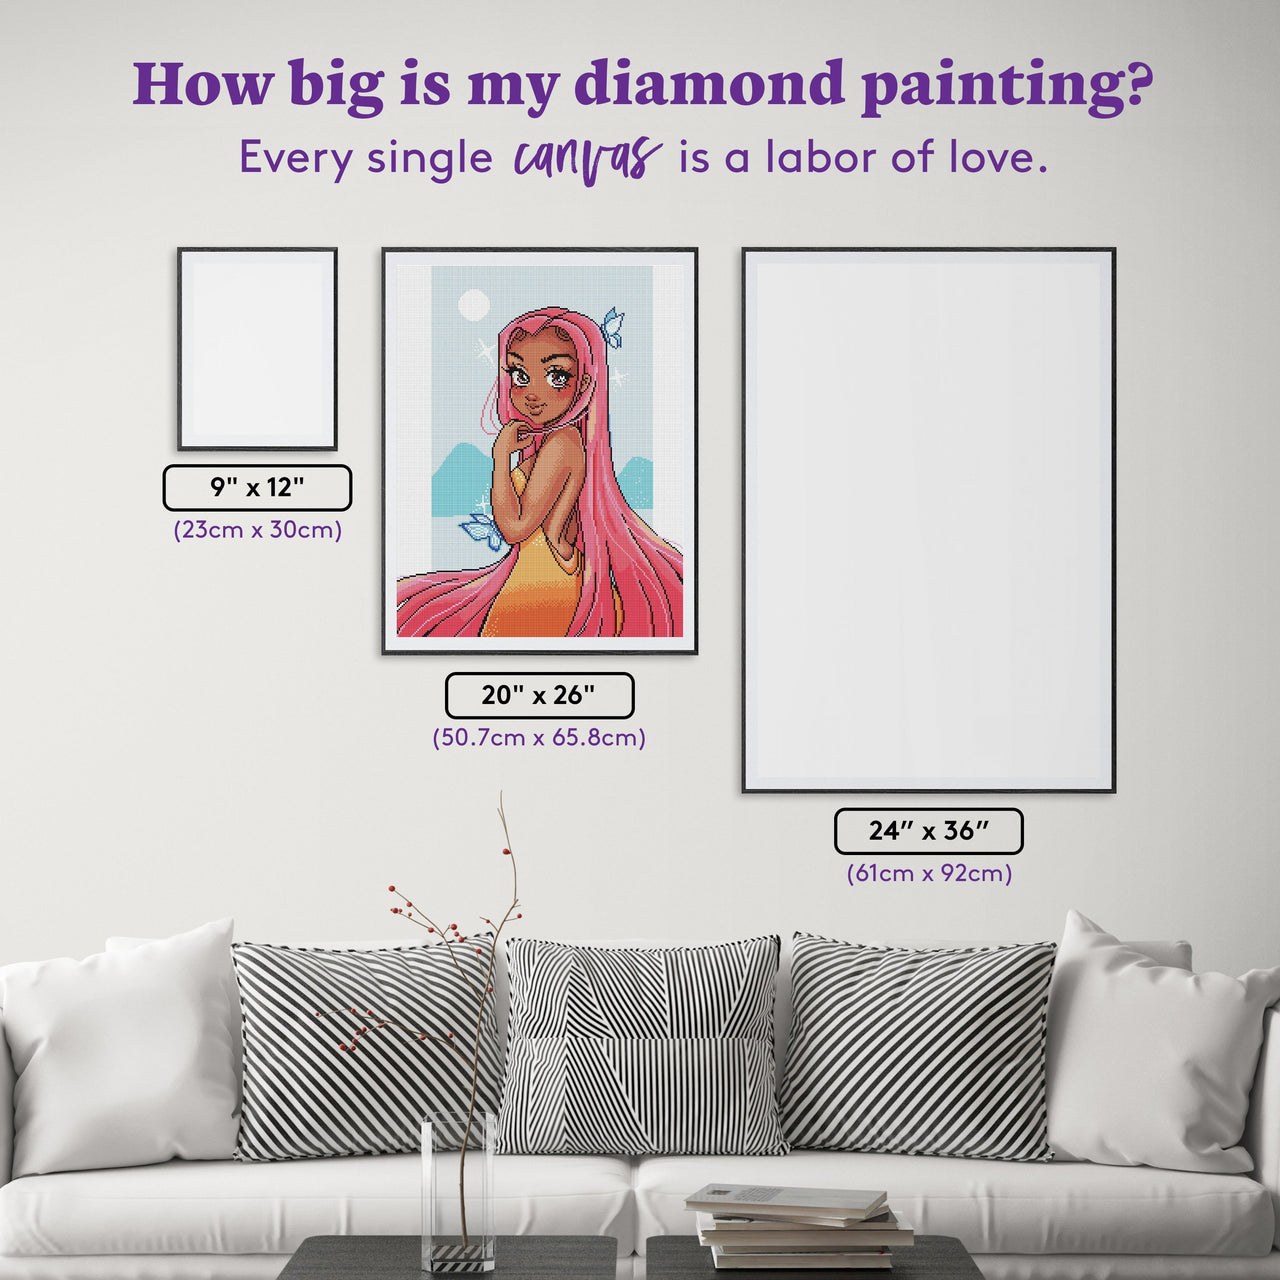 Diamond Painting Sunset Babe 20" x 26" (50.7cm x 65.8cm) / Round with 28 Colors including 2 ABs and 1 Fairy Dust Diamonds / 42,535